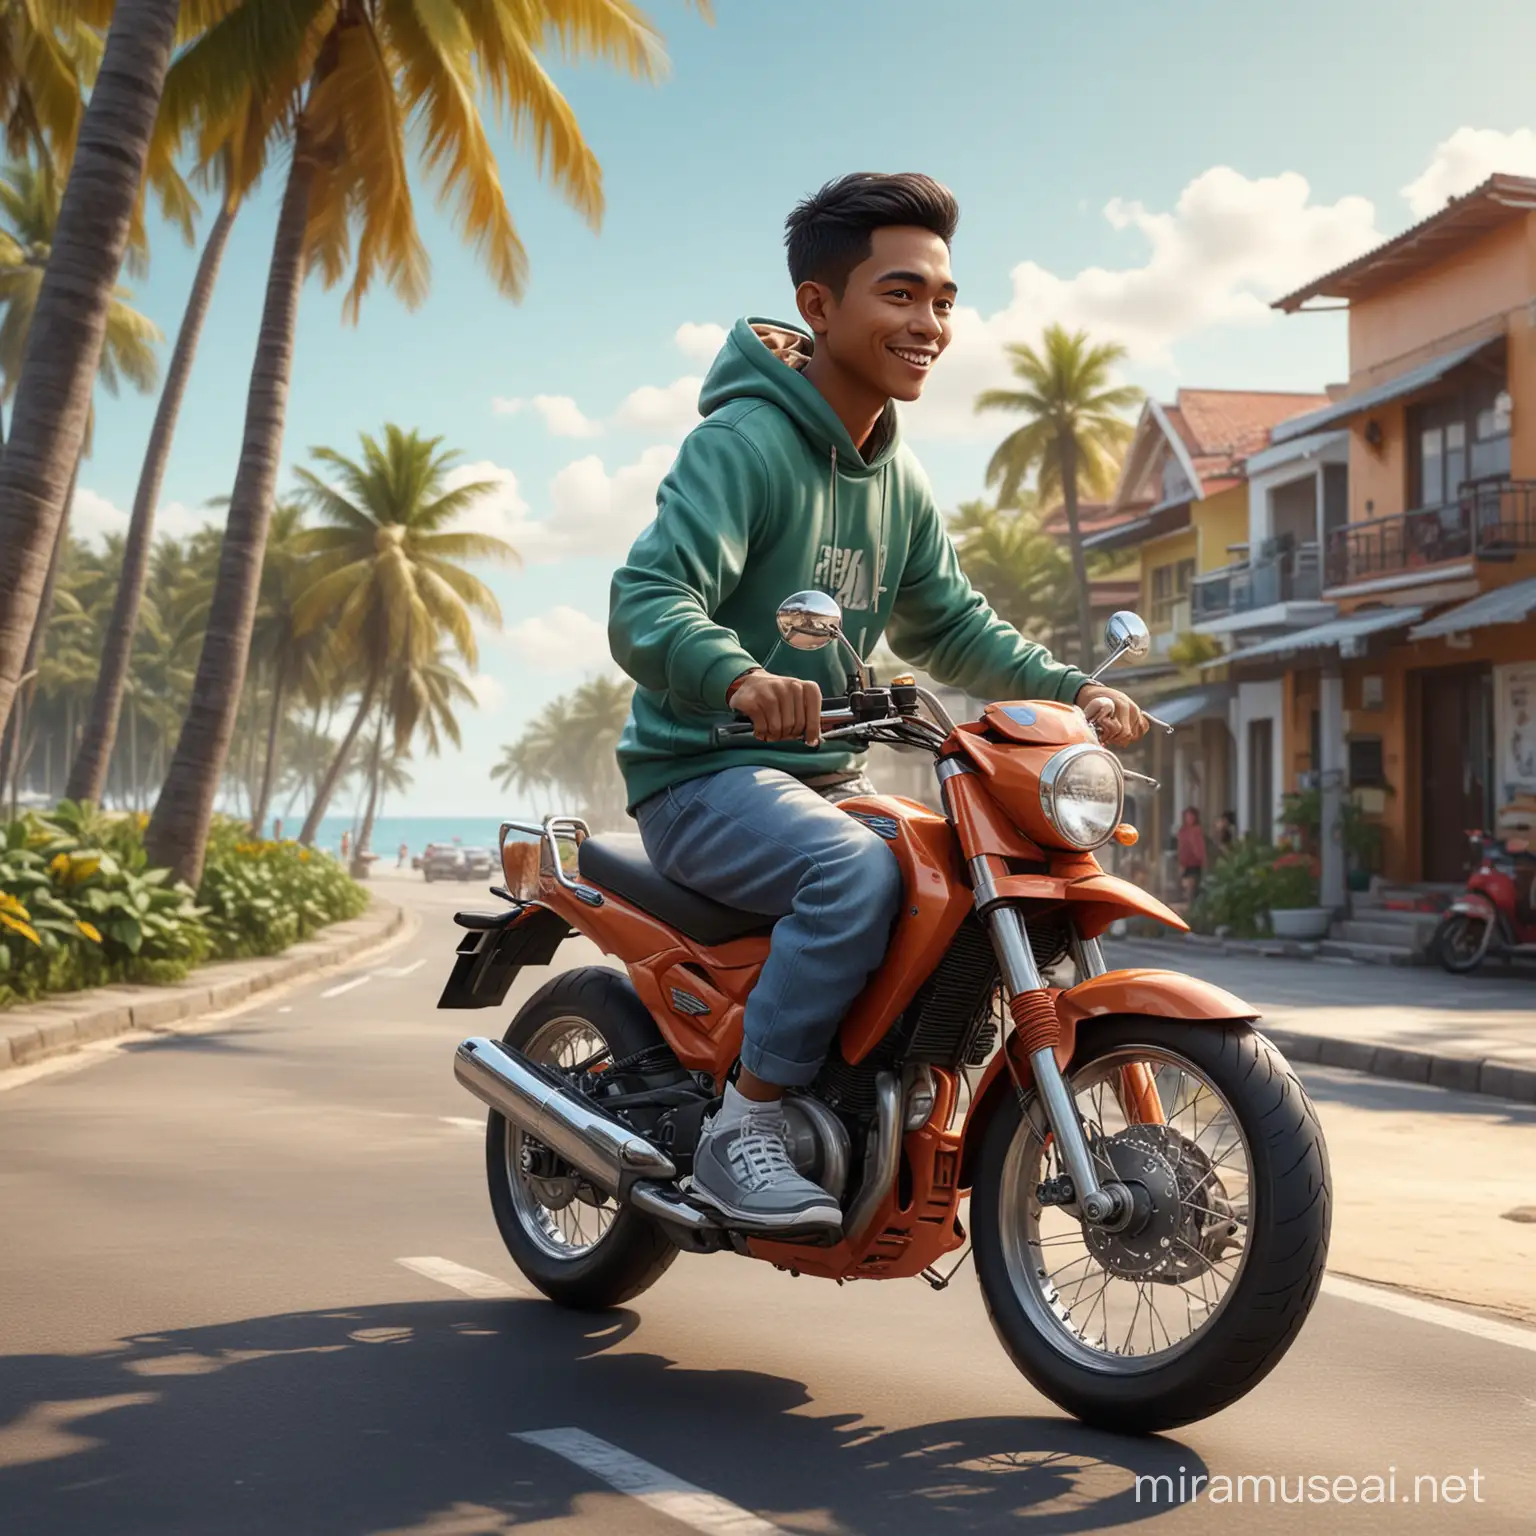 Stylish Indonesian Man Riding Motorcycle by Vibrant Beach